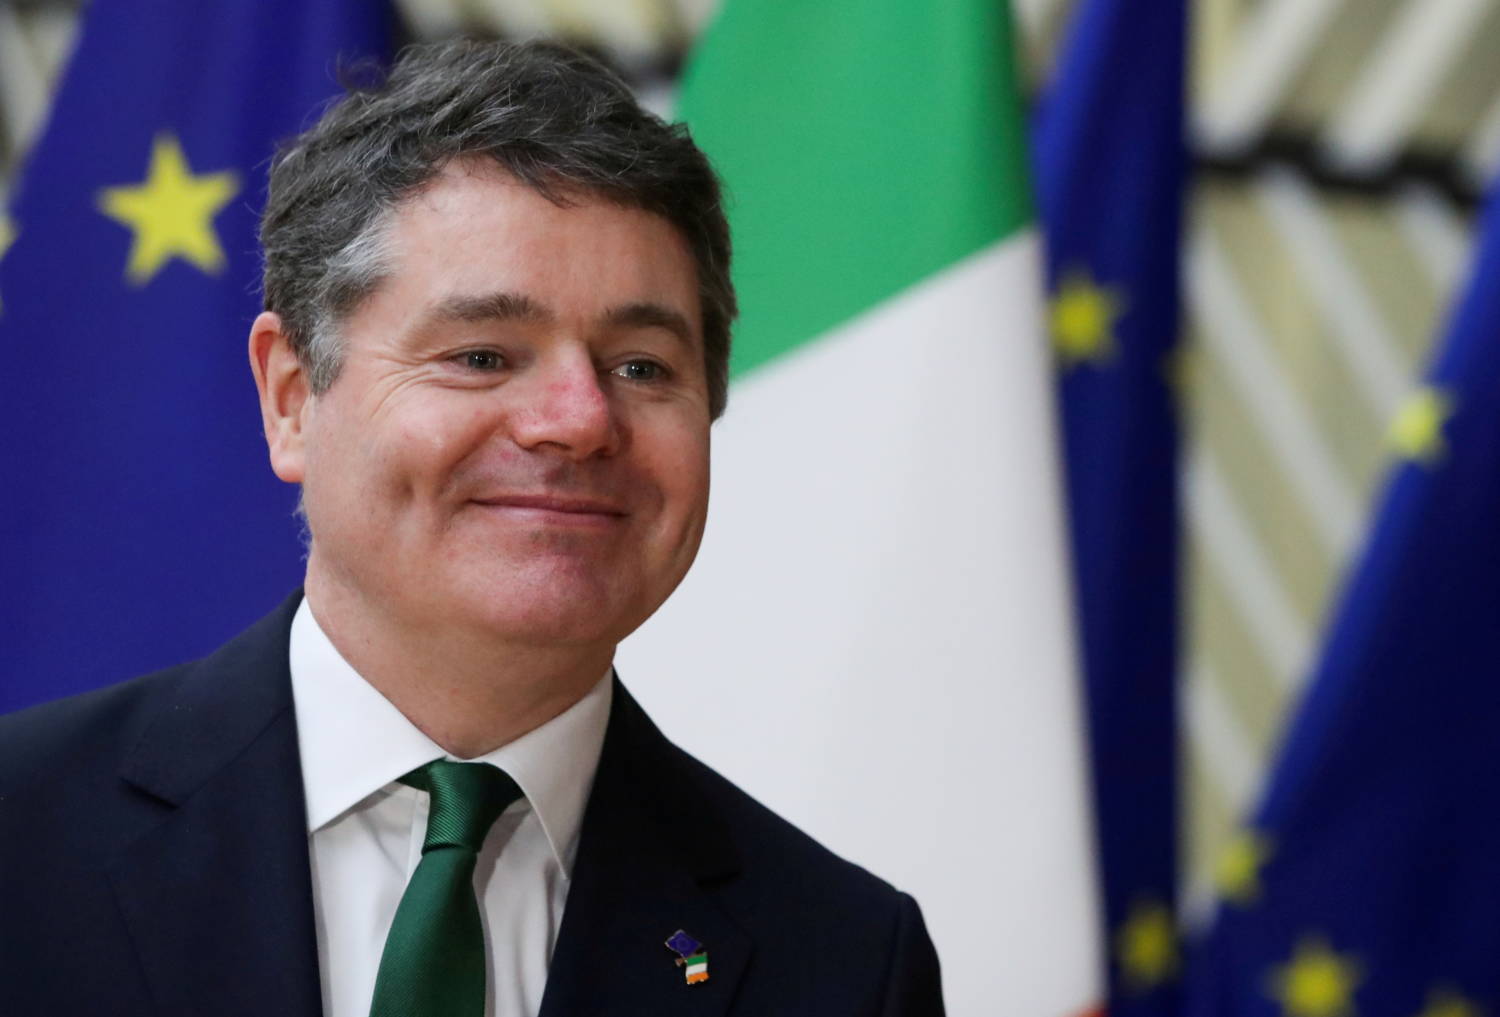 File Photo: Irish Finance Minister Paschal Donohoe Arrives At The Eu Council Headquarters In Brussels